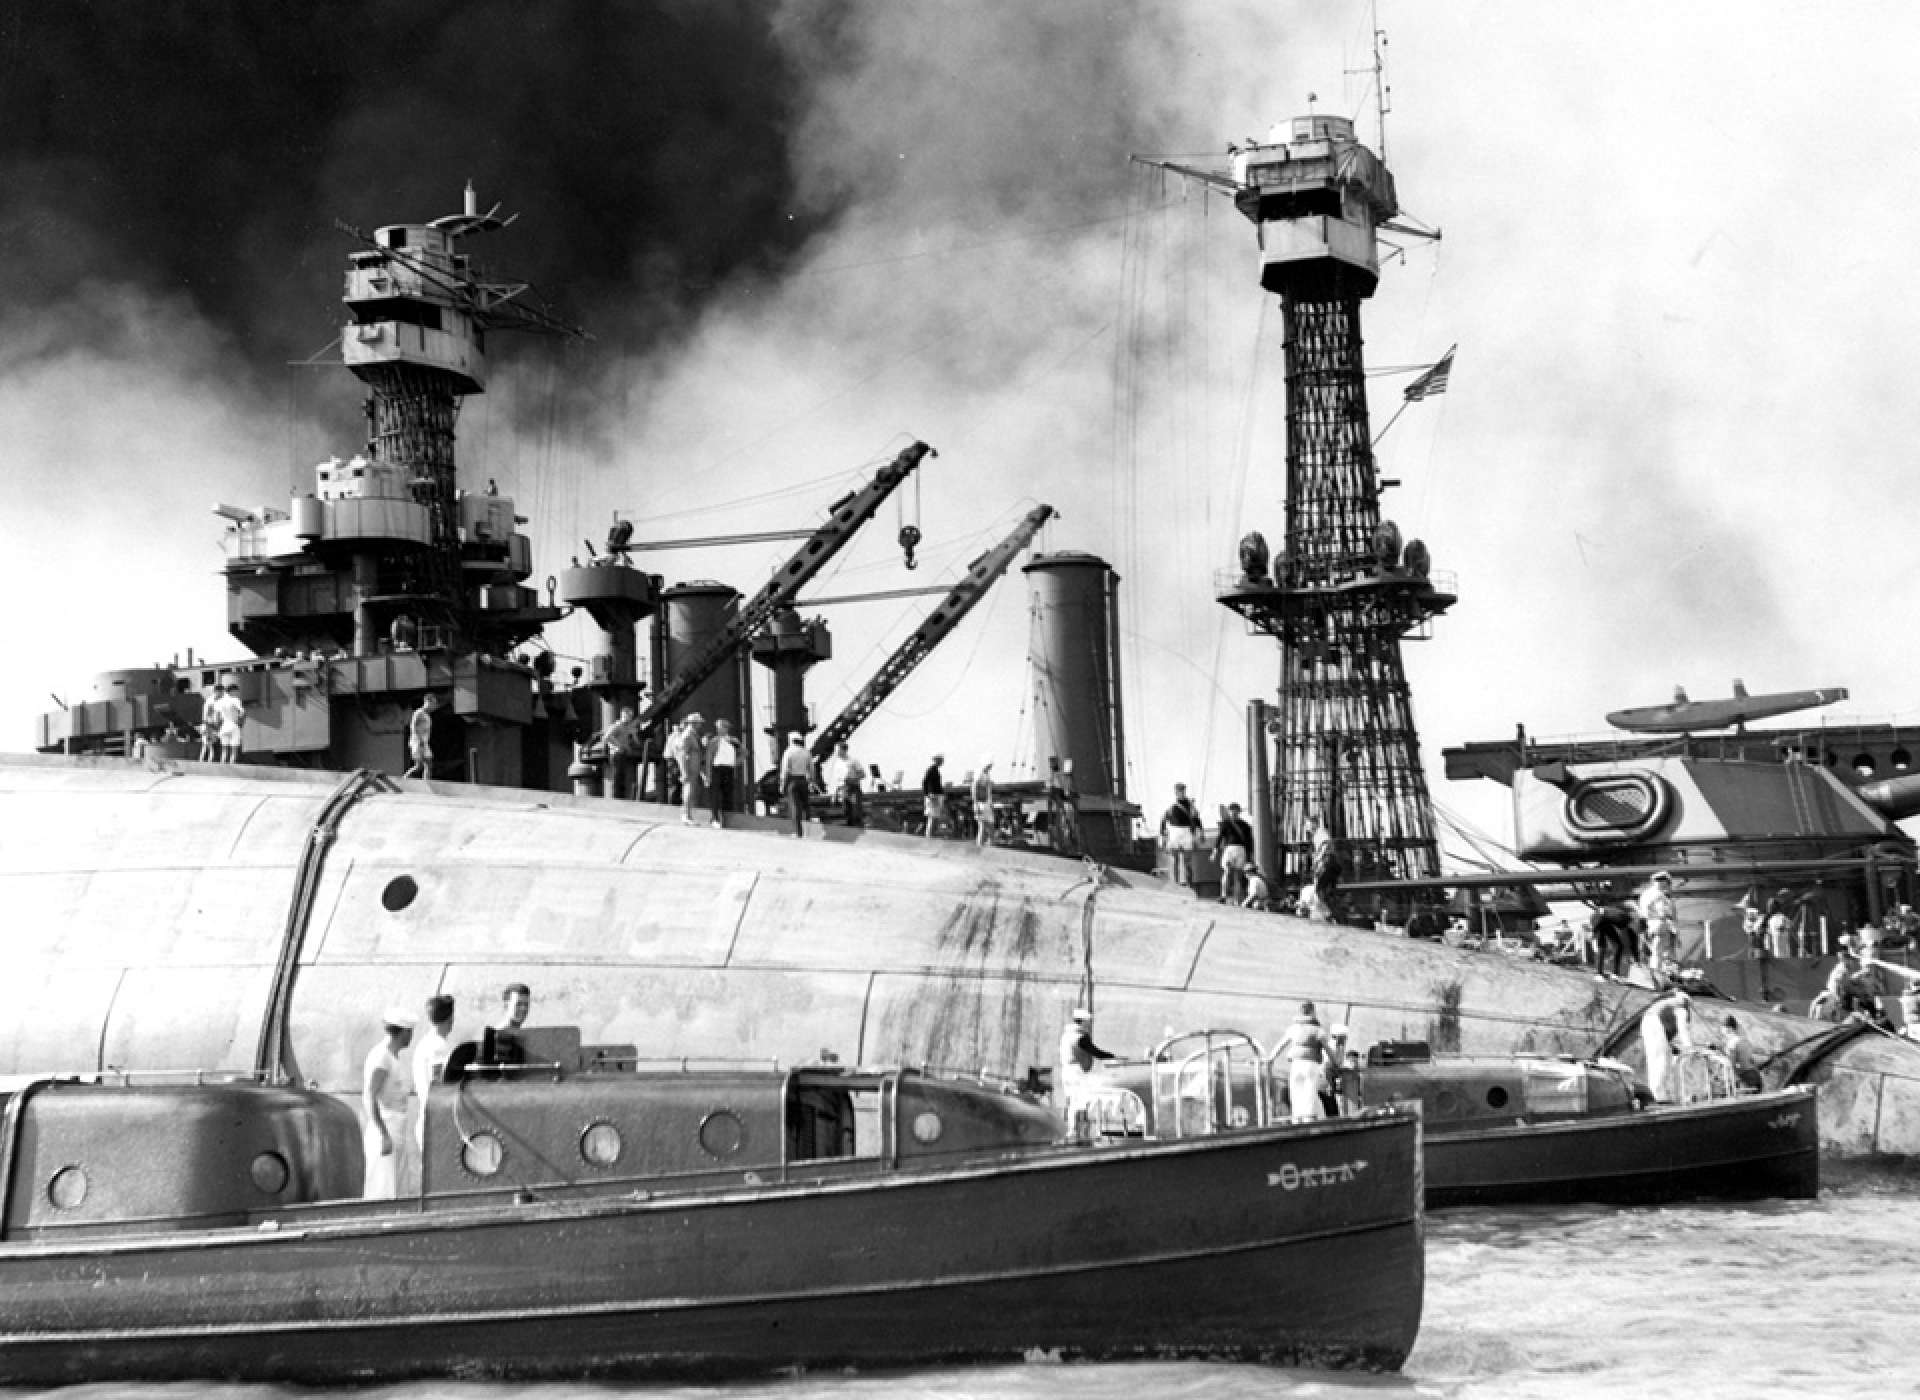 Rescue efforts underway on the overturned hull of USS Oklahoma (BB-37)